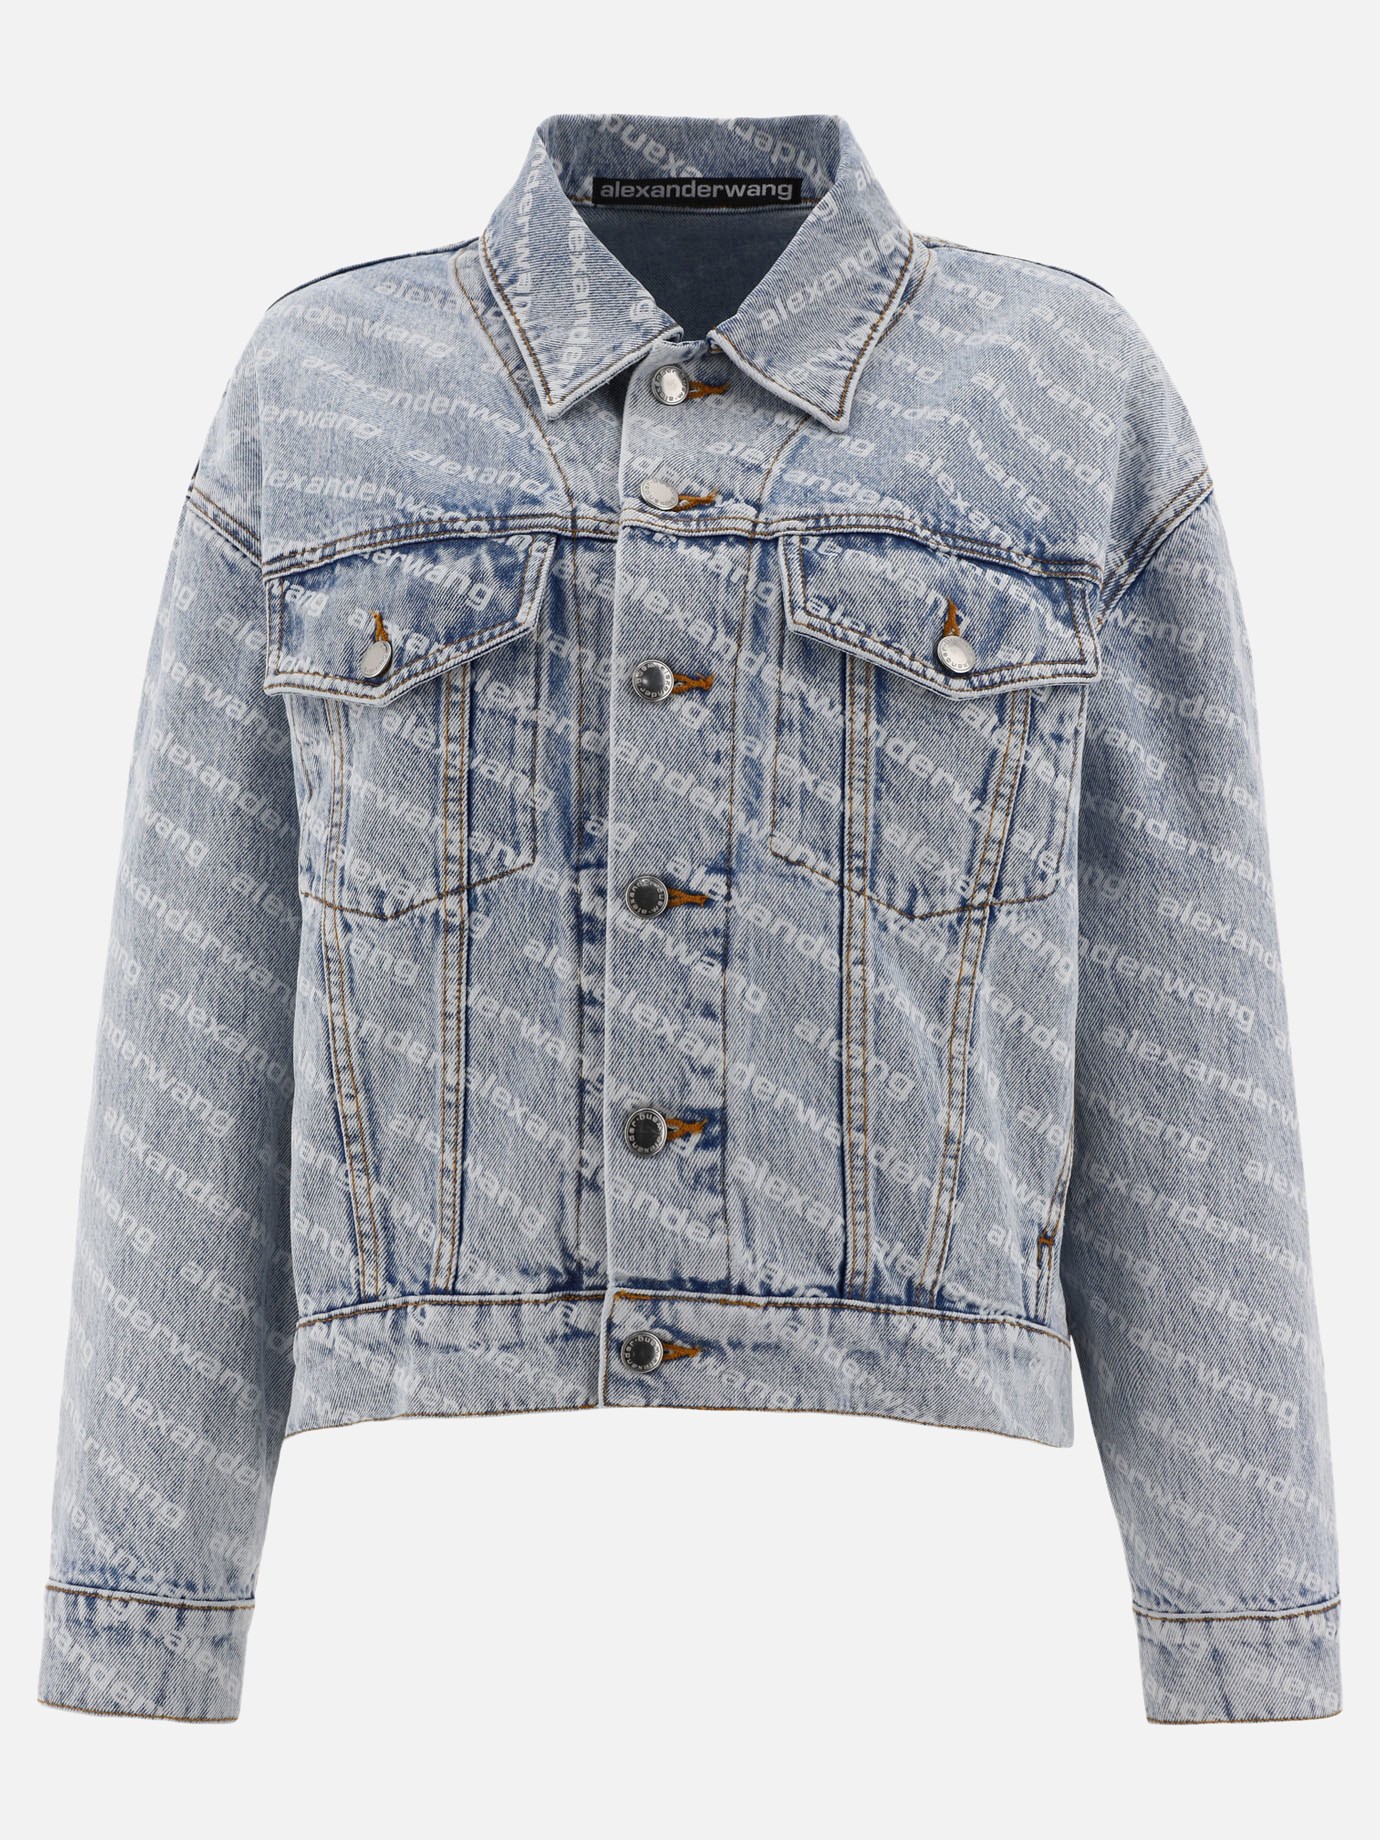 All-over denim jacket by Alexander Wang - 0